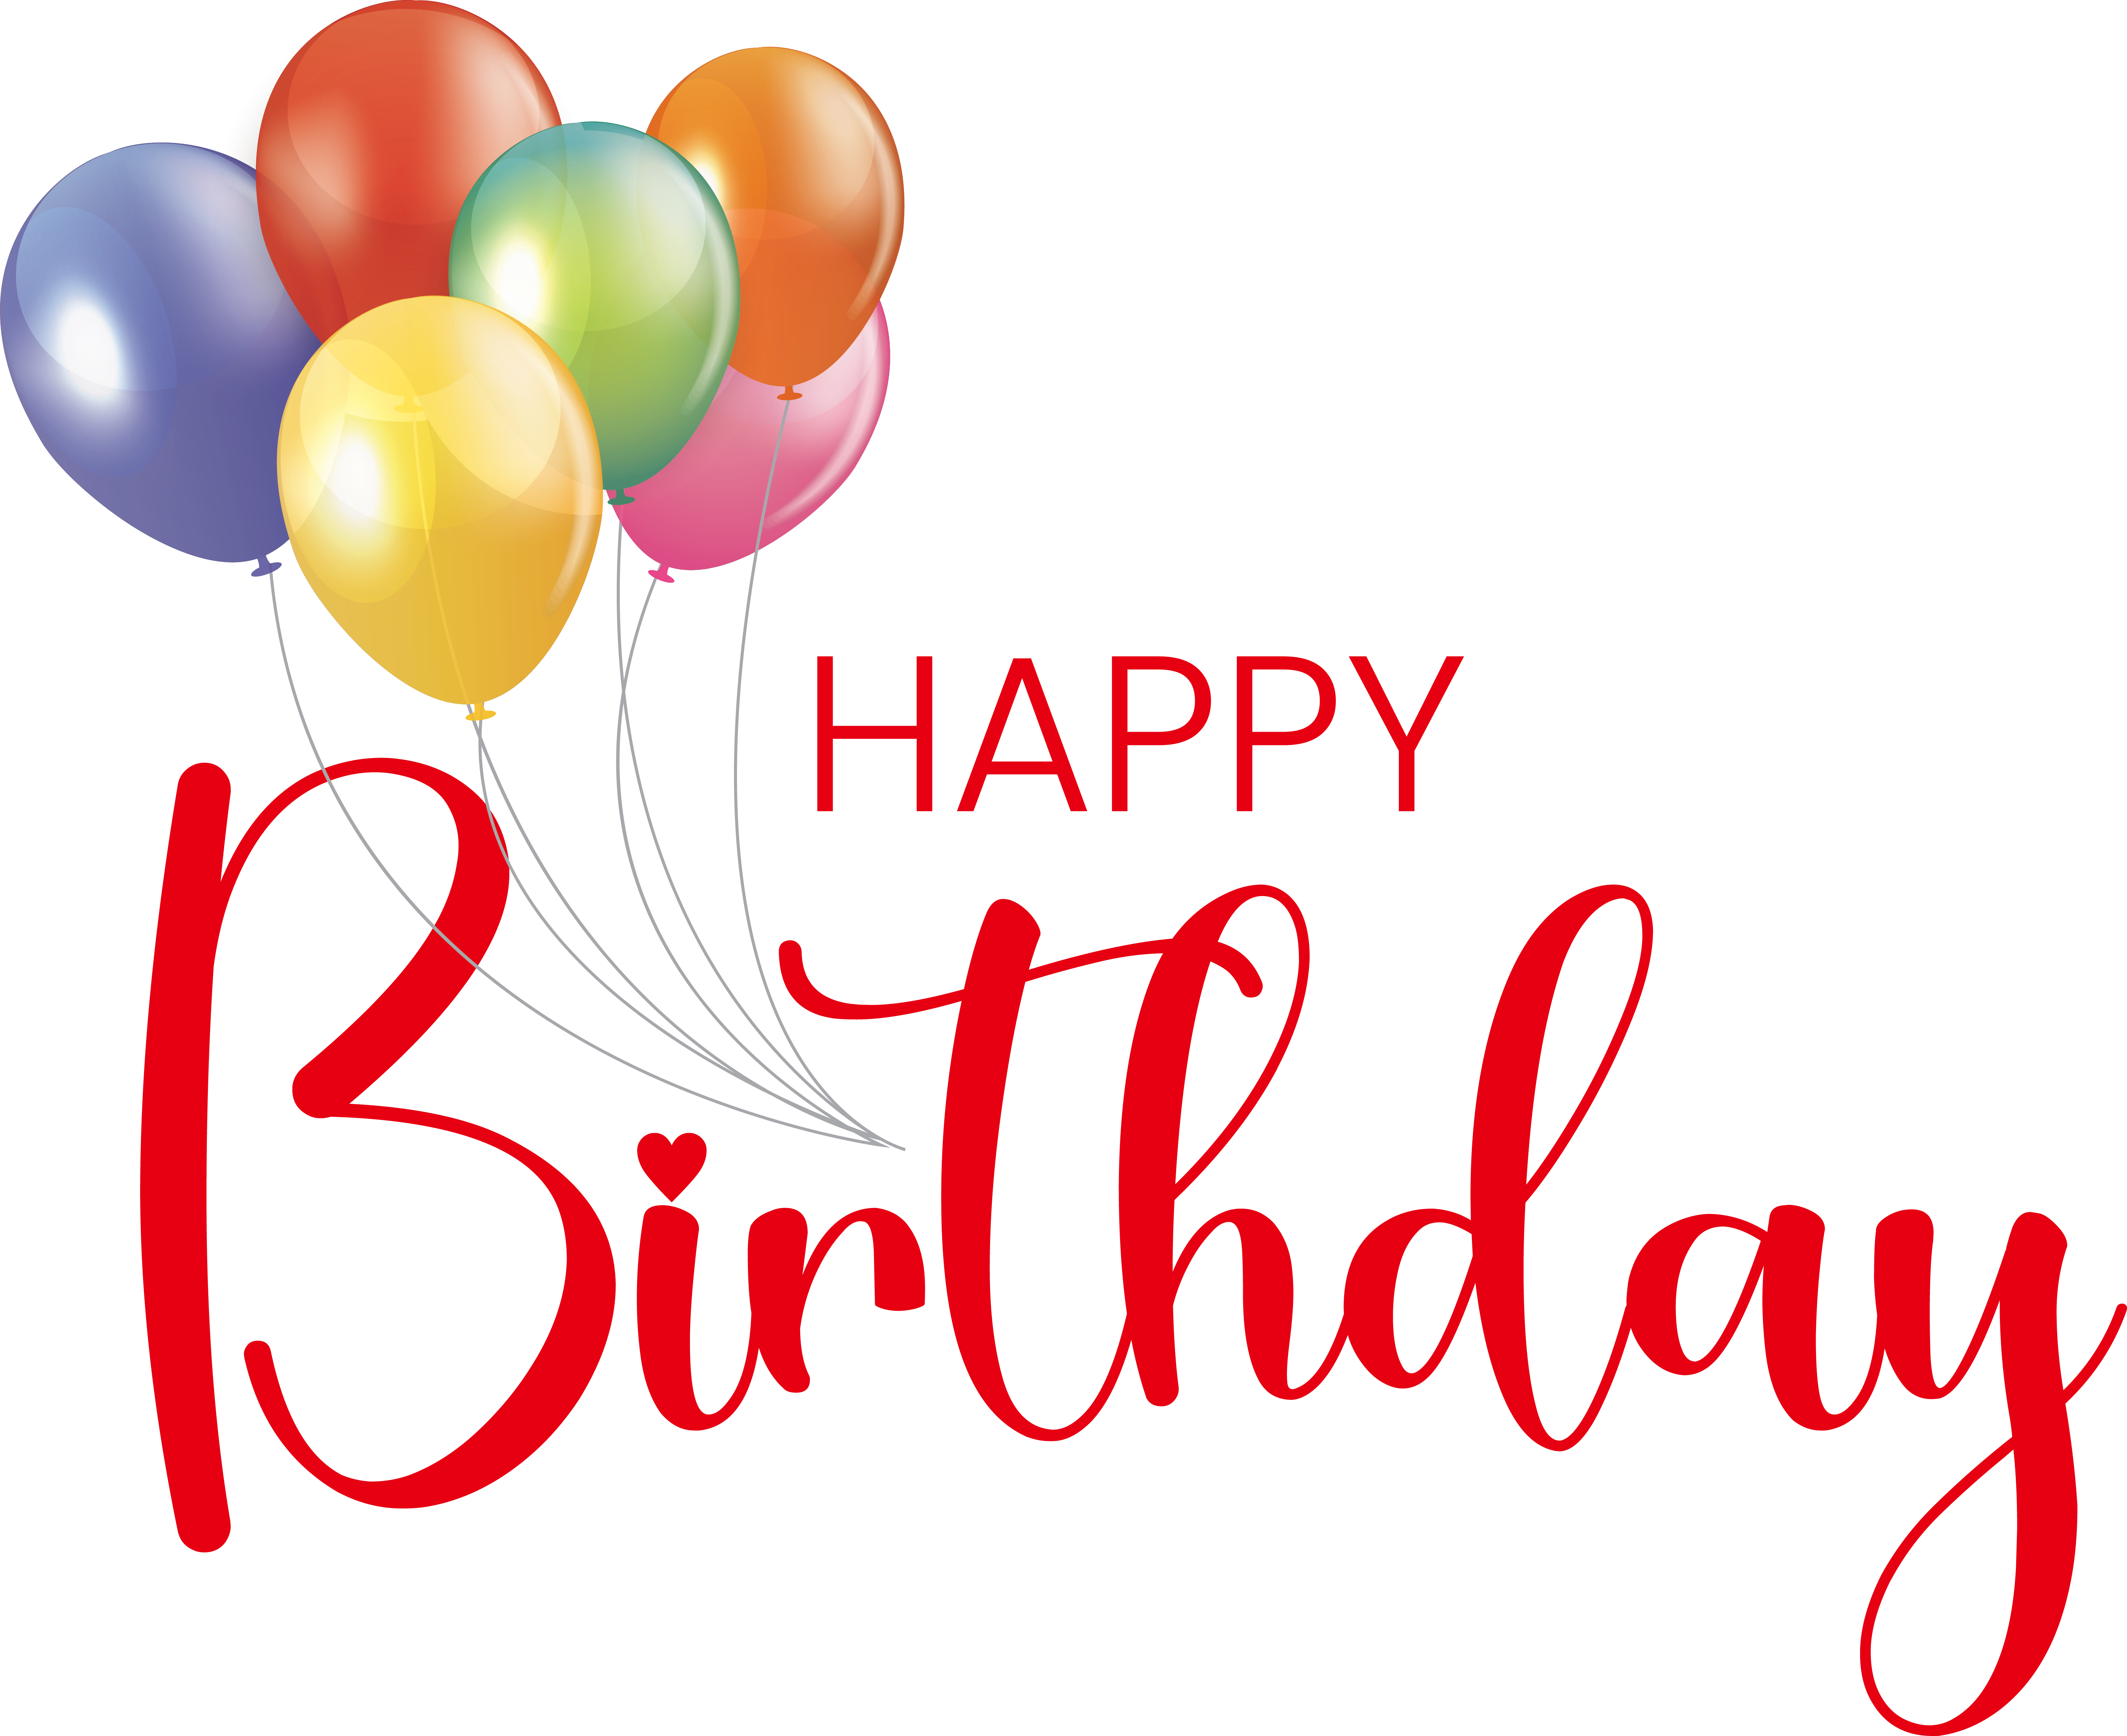 Free PNG Download: Happy Birthday Text with Balloon